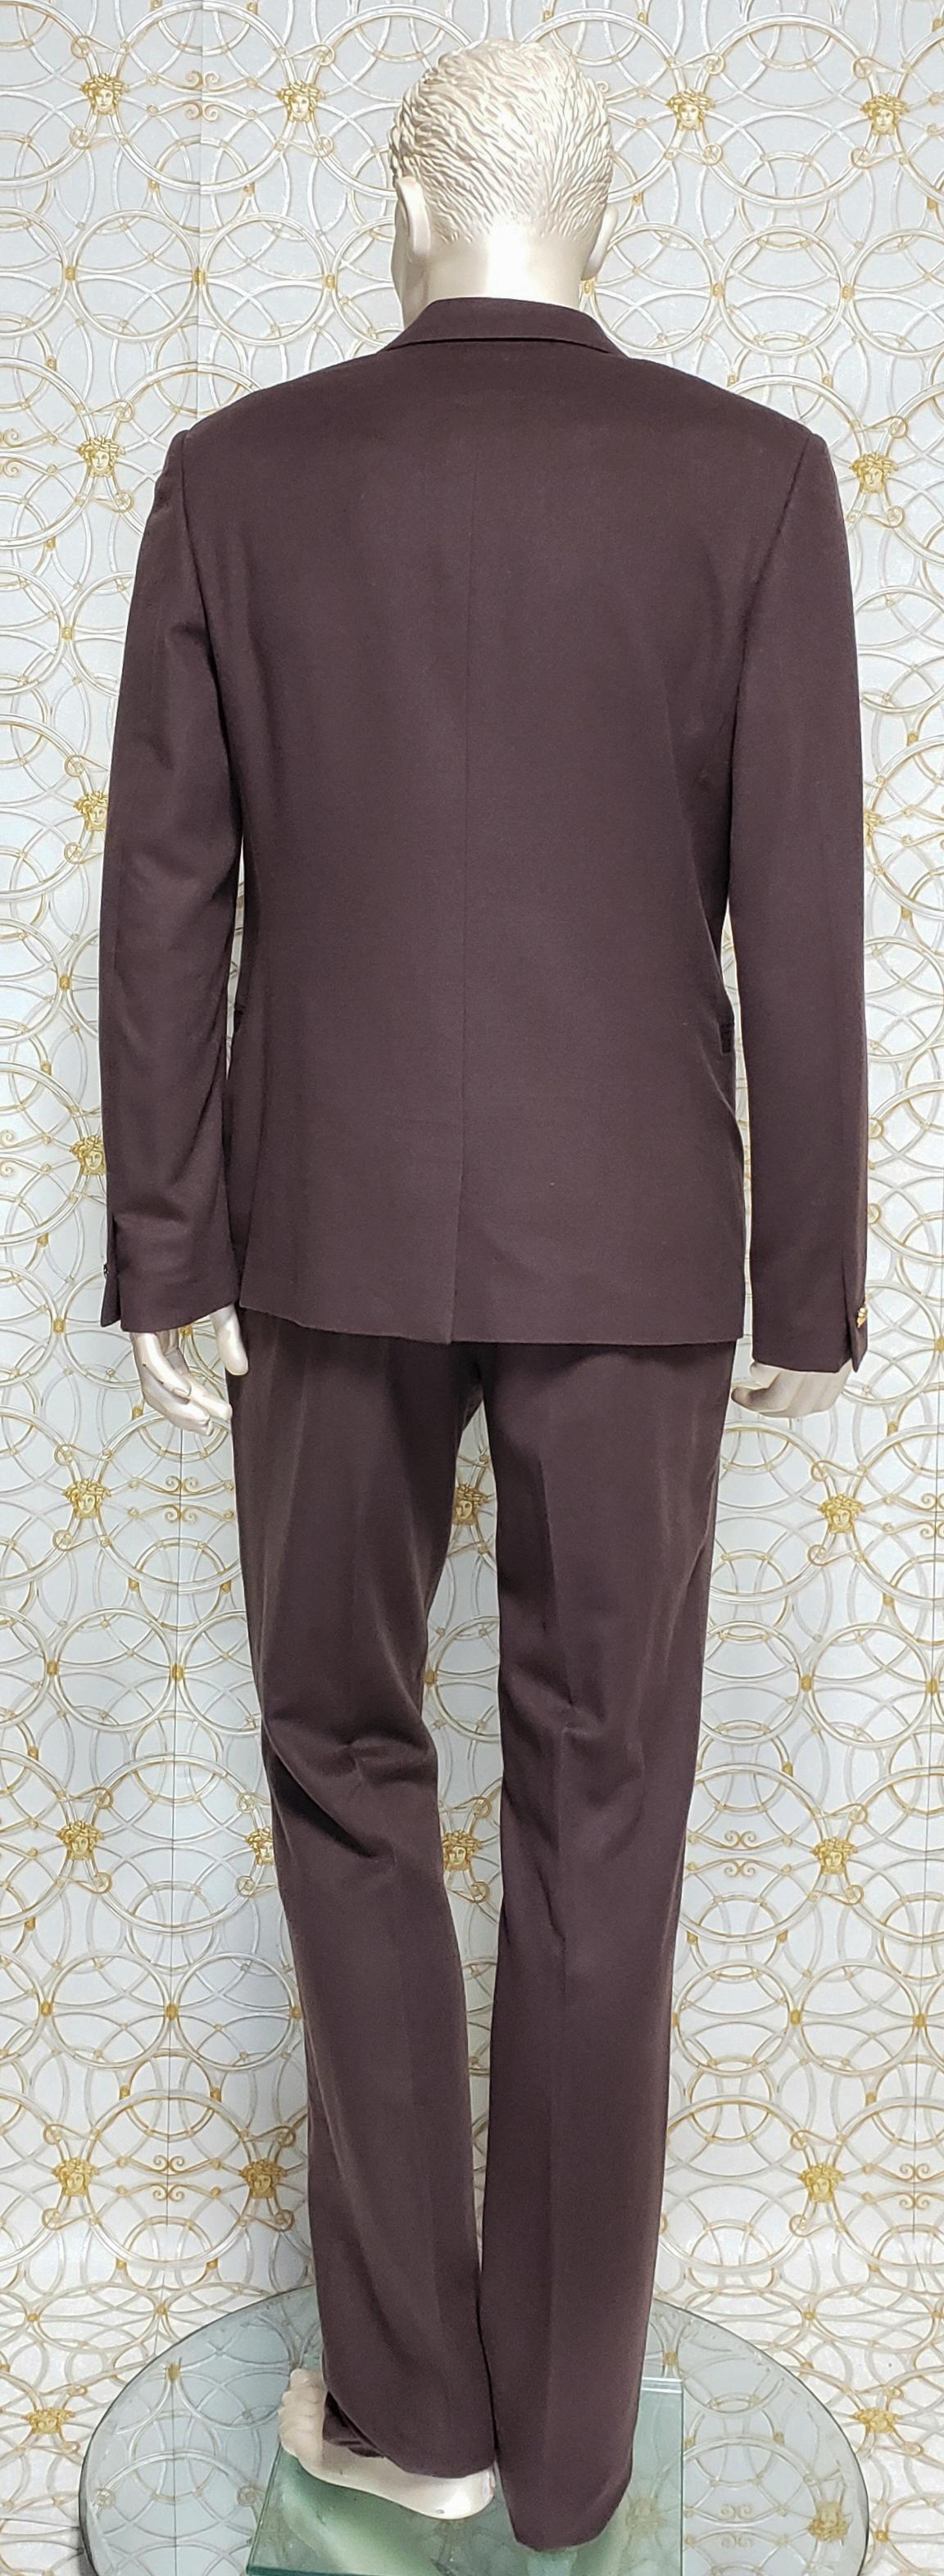 Black F/W 2015 look # 3 BRAND NEW VERSACE BROWN CASHMERE and SILK SUIT 50 - 40 (L) For Sale